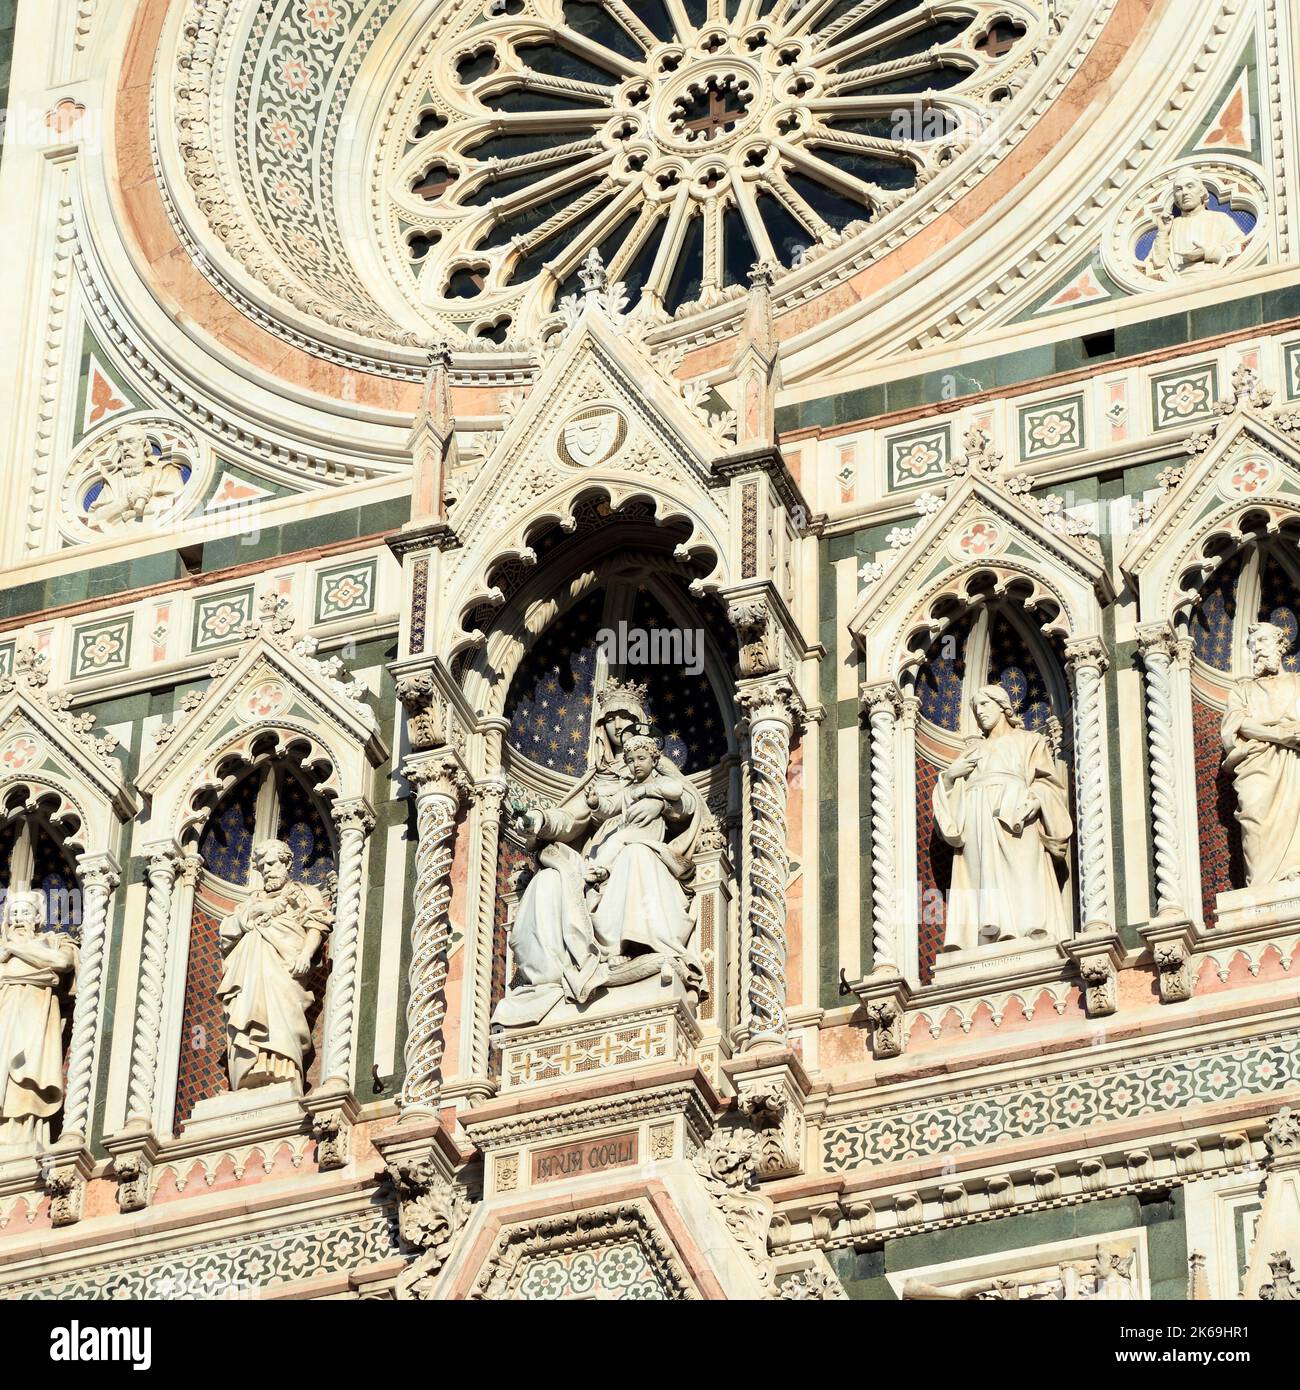 Detail of  the Duomo di Firenze, Cathedral of Santa Maria del Fiore, Florence Stock Photo